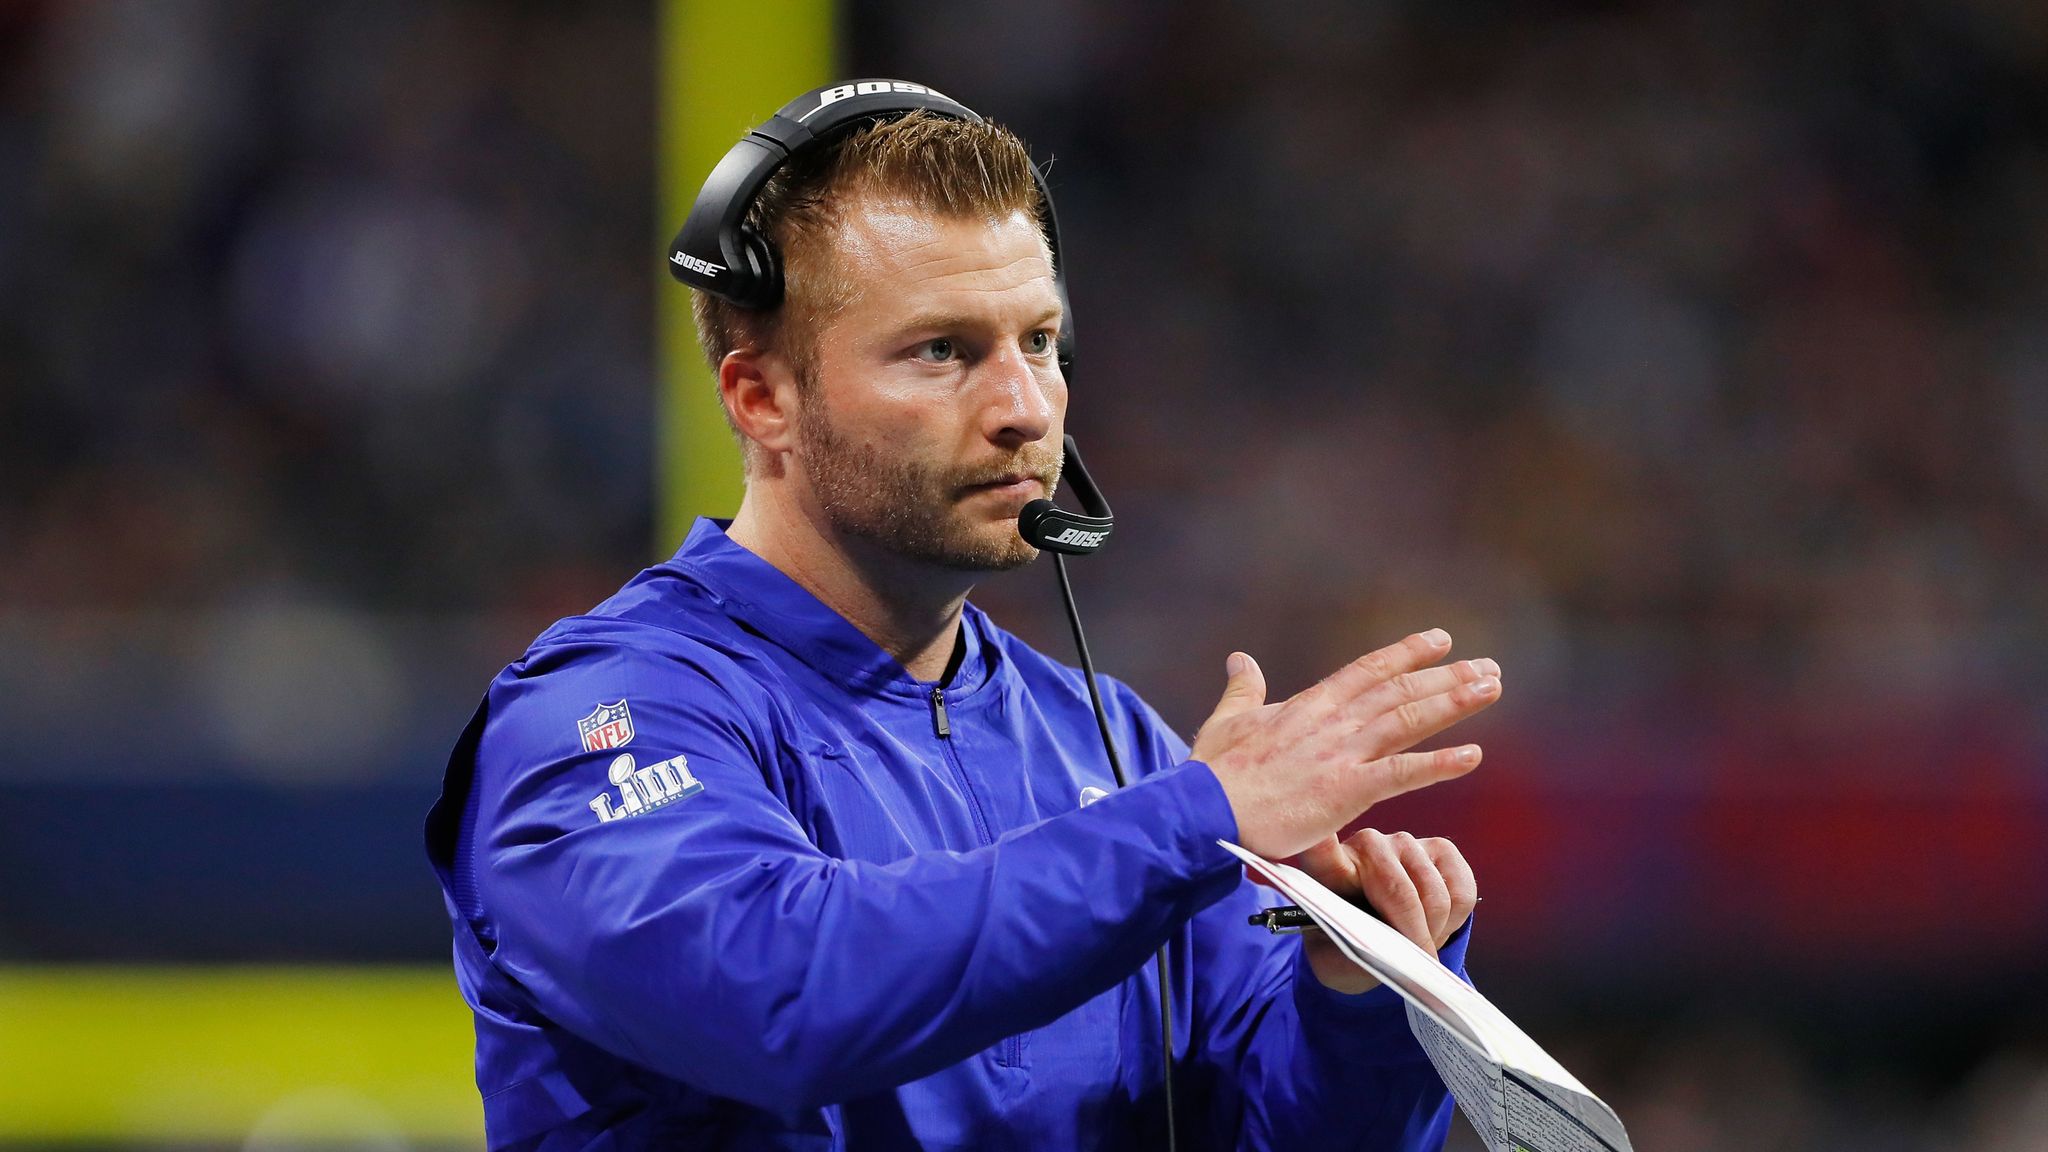 Welcome to the Sean McVay Moment - Inside the pressures that